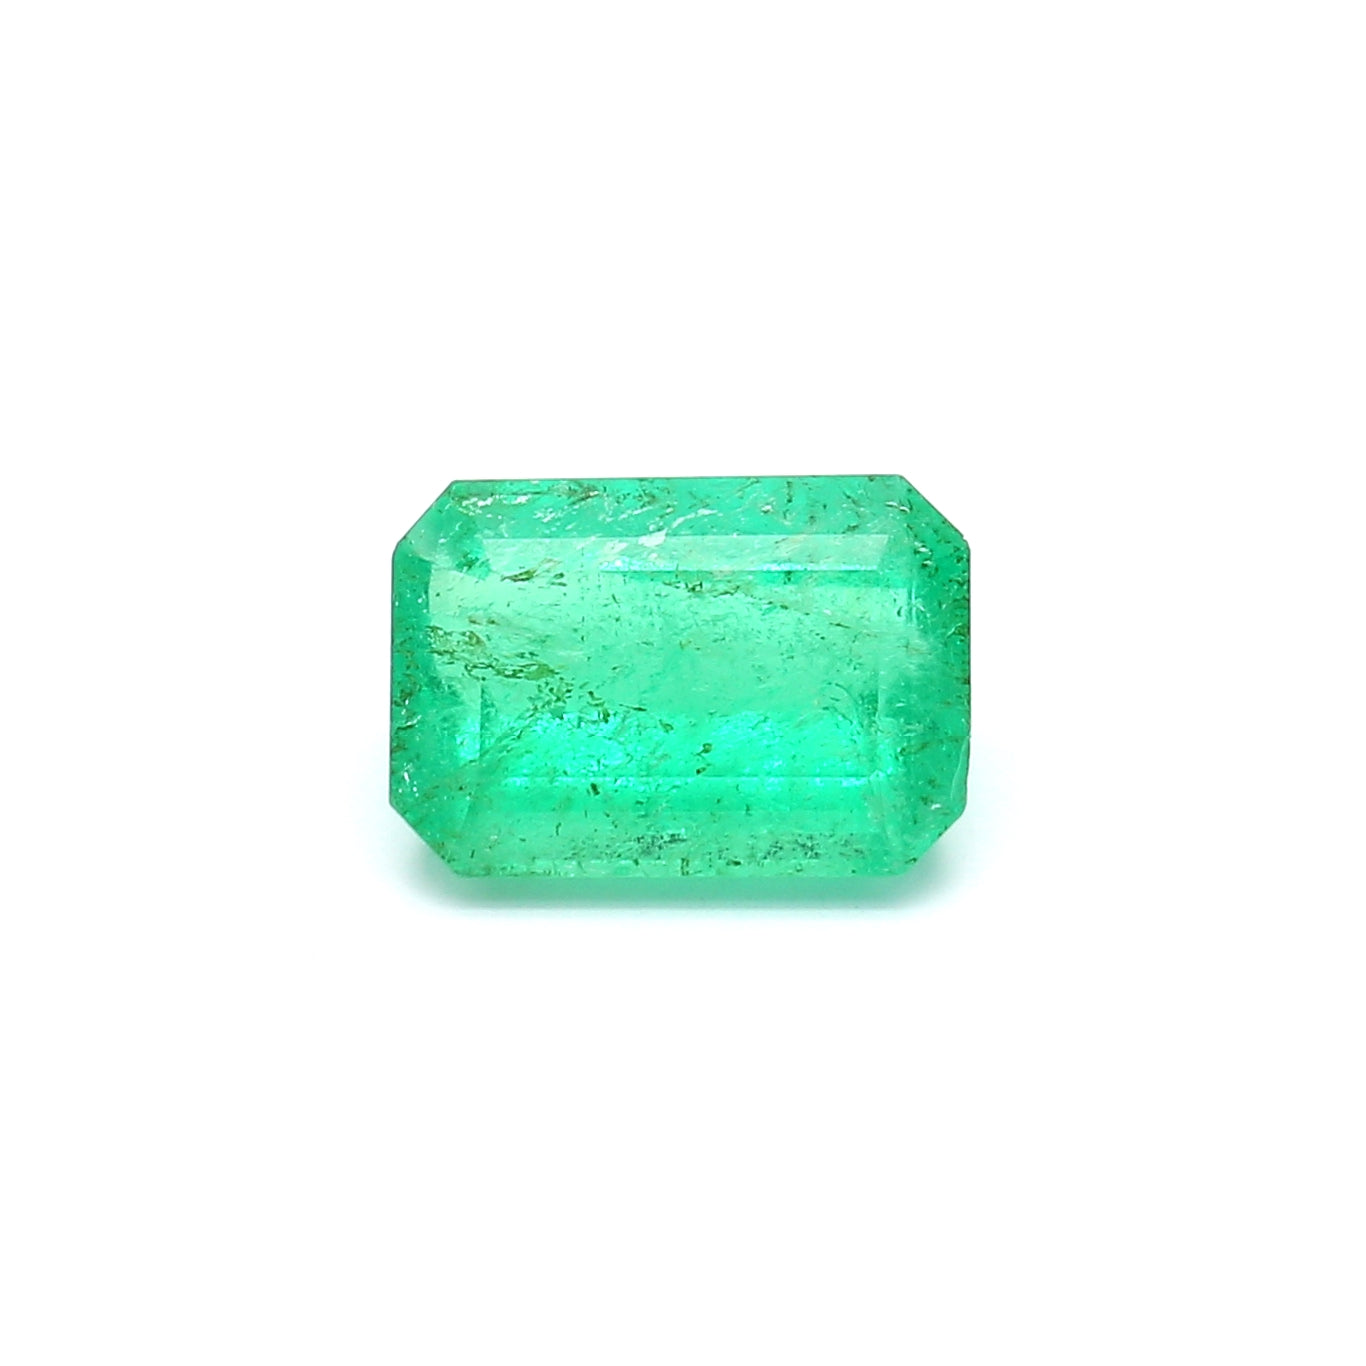 2.57ct Octagon Emerald, Moderate Oil, Colombia - 10.16 x 7.07 x 4.71mm